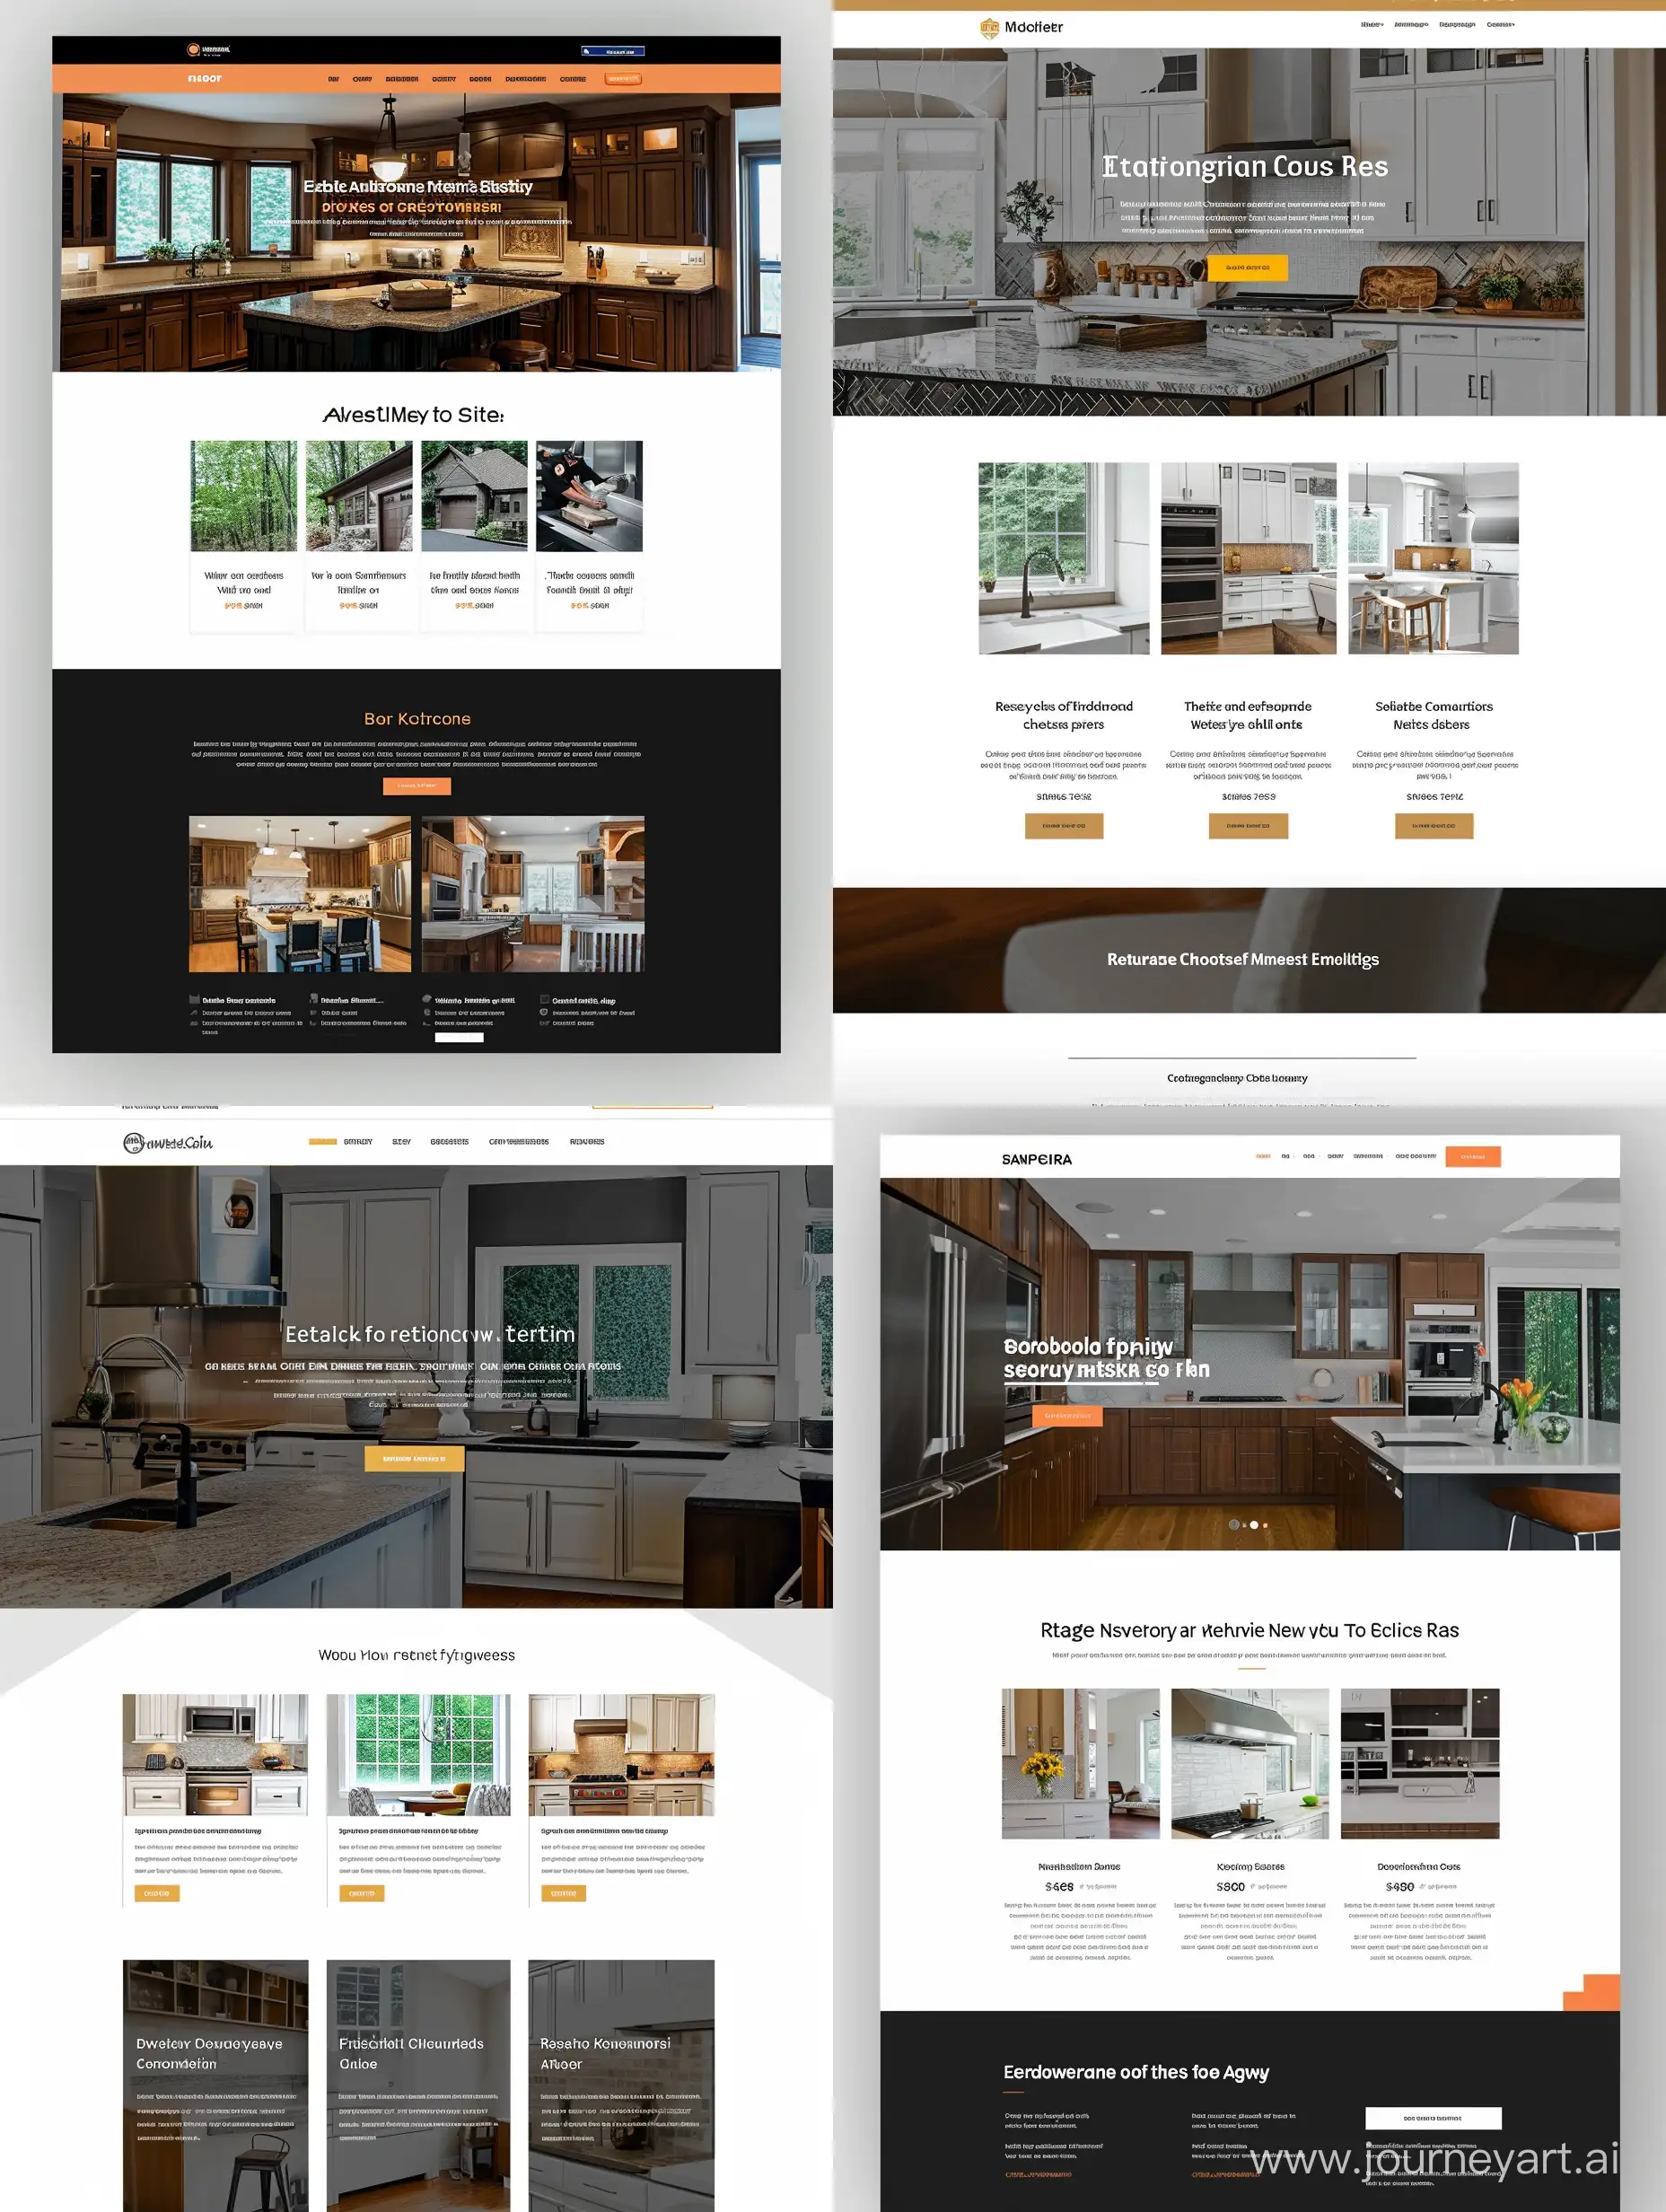 Refacing and remodel contractor's modern website homepage design